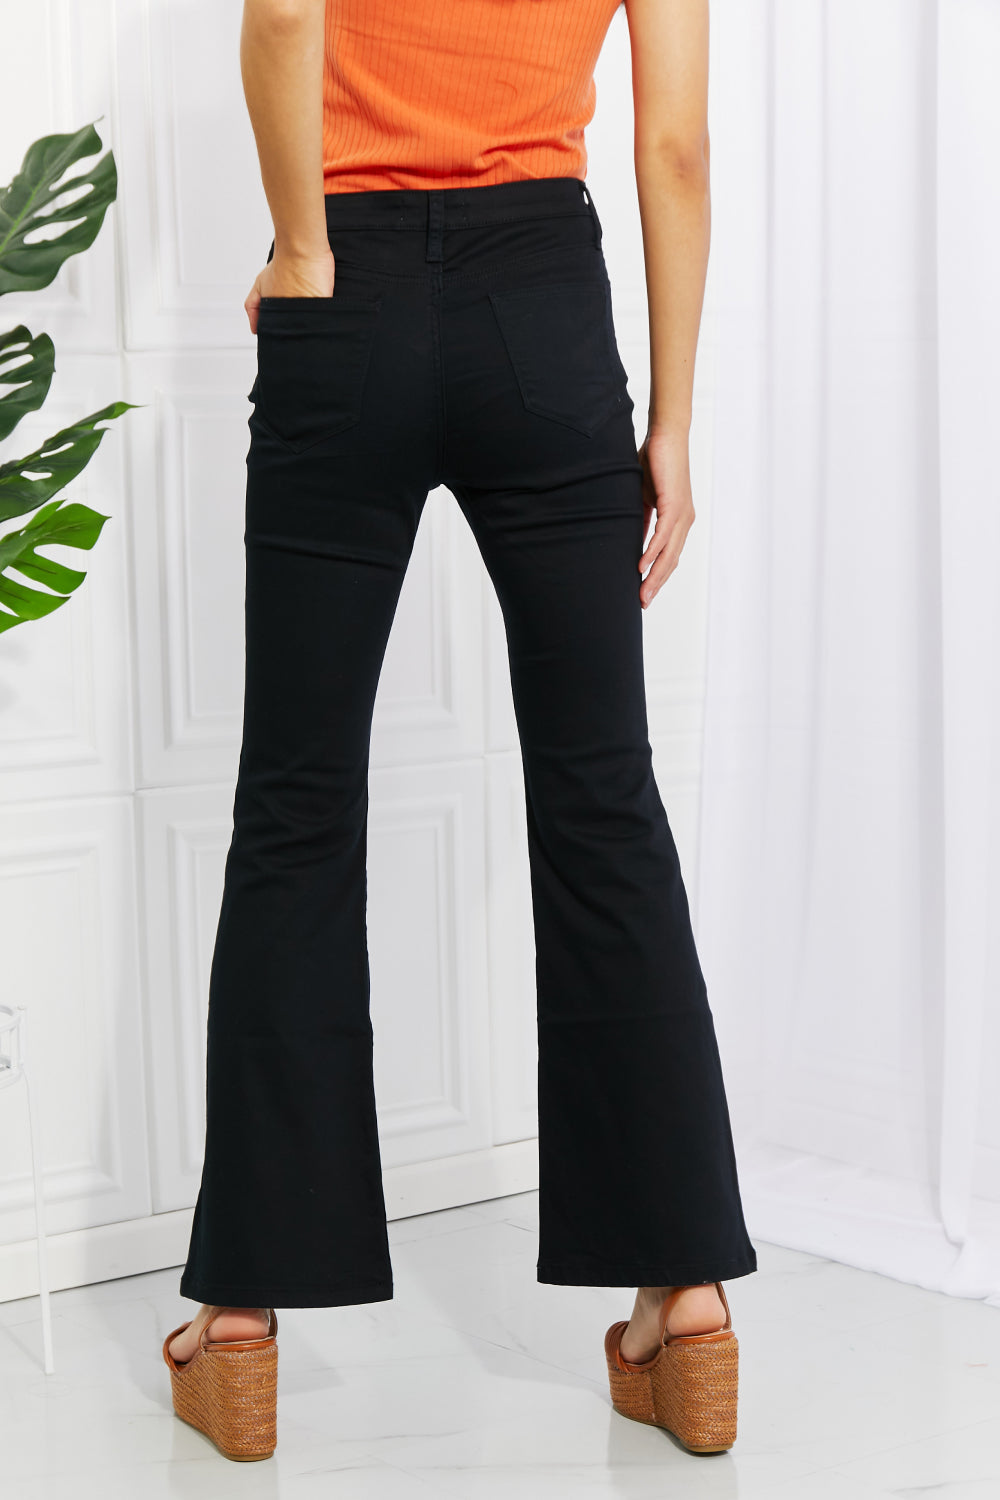 Clementine High-Rise Bootcut Jeans